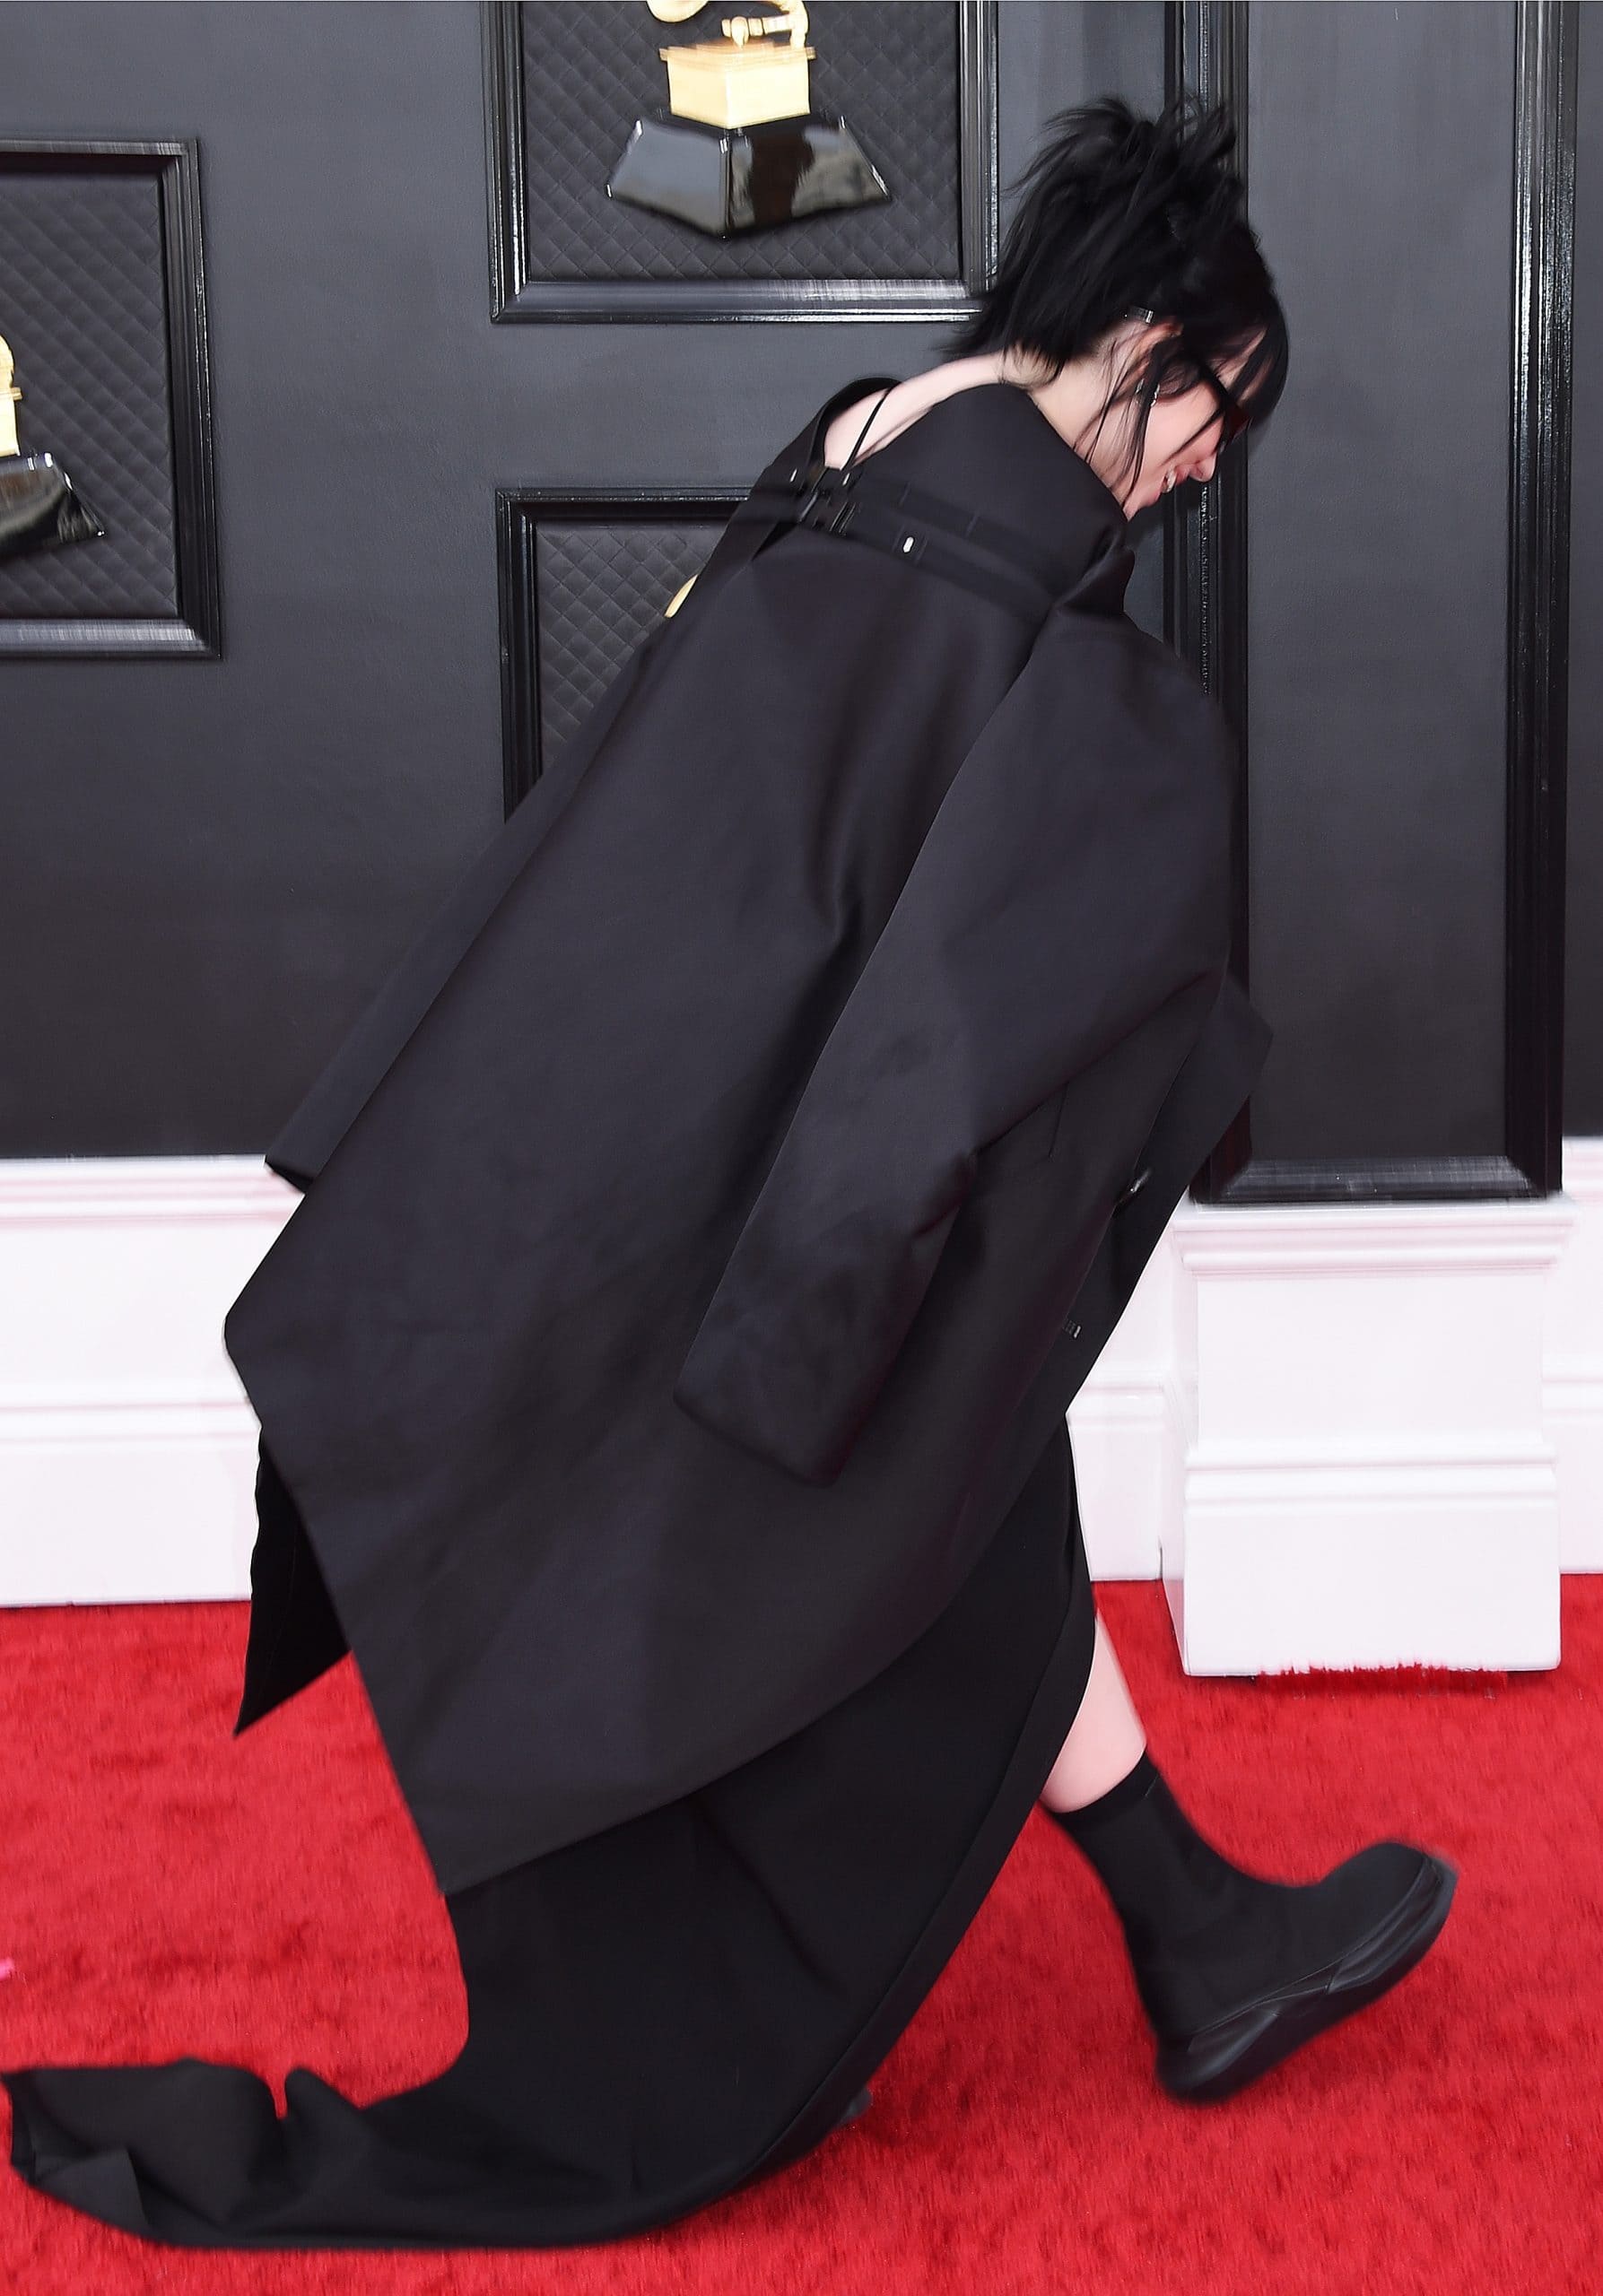 Billie Eilish styled a black floor-length dress with a long trench coat and rubber-soled black platform boots